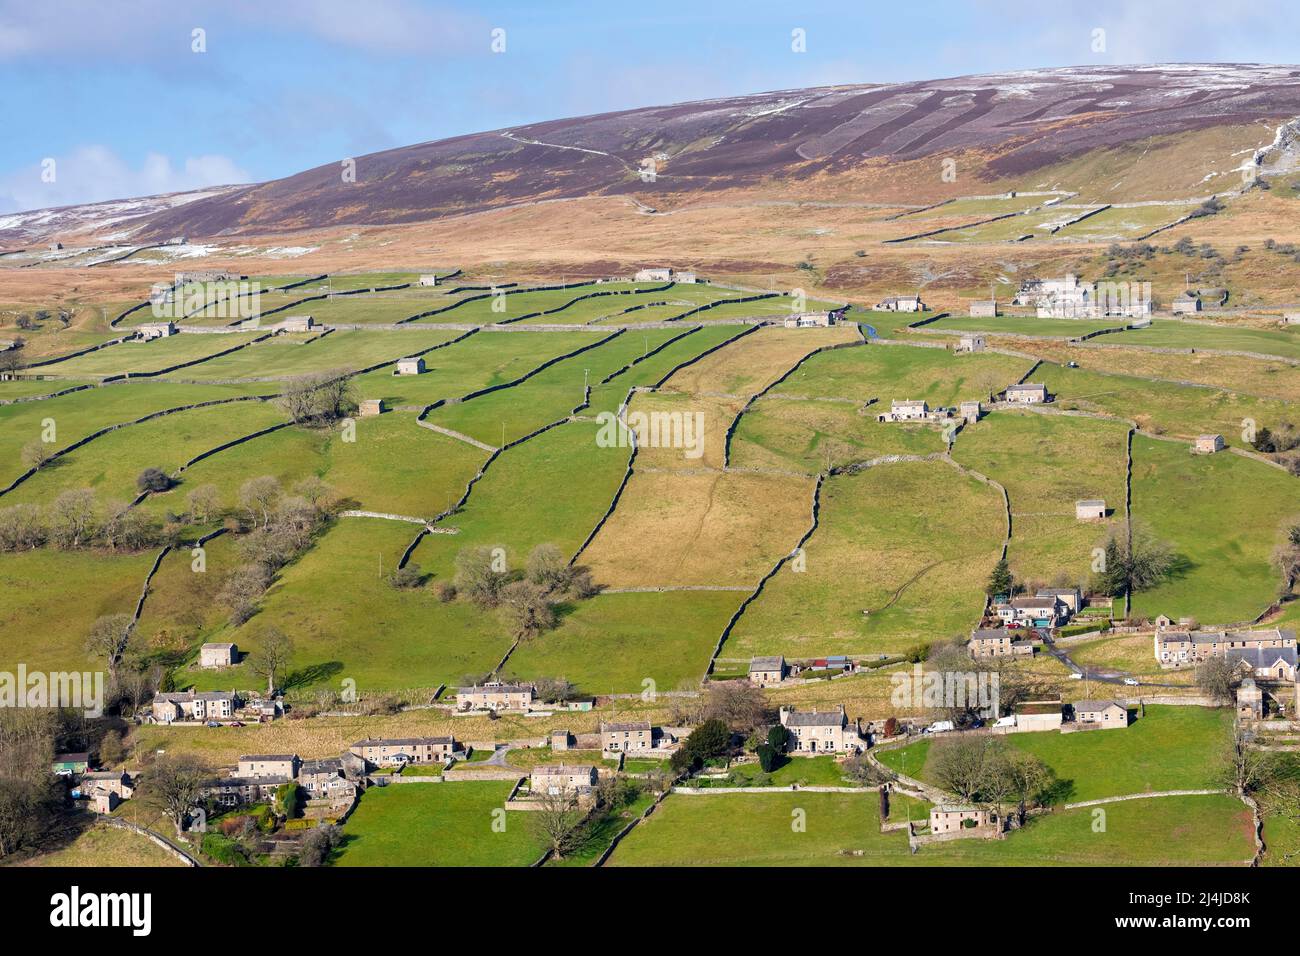 Swaledale, Yorkshire Dales National Park, Snow covered hills above a patchwork of dry stone wall lined fields and pastures with iconic stone barns in Stock Photo